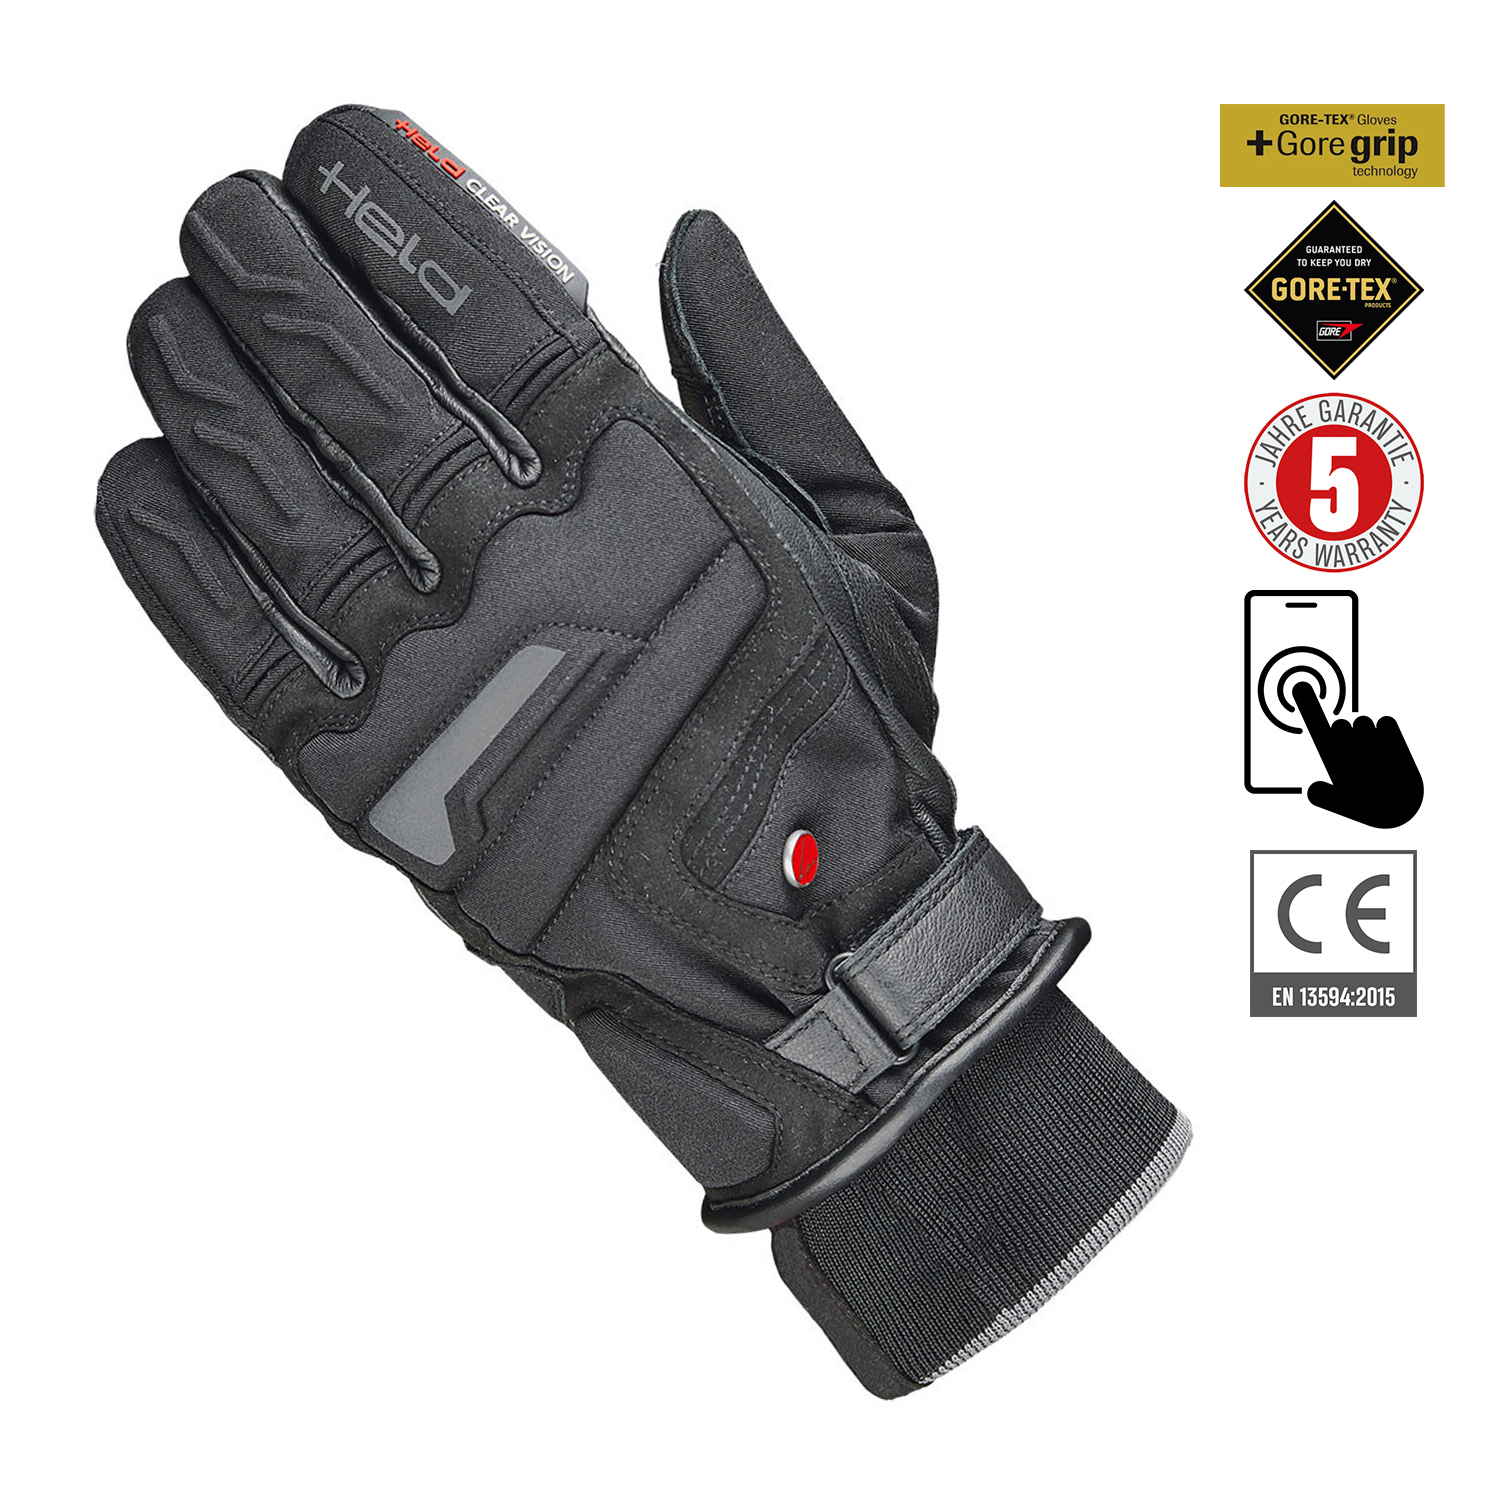 Held Satu KTC Gore-Tex Womens Gloves Black - Available in Various Sizes